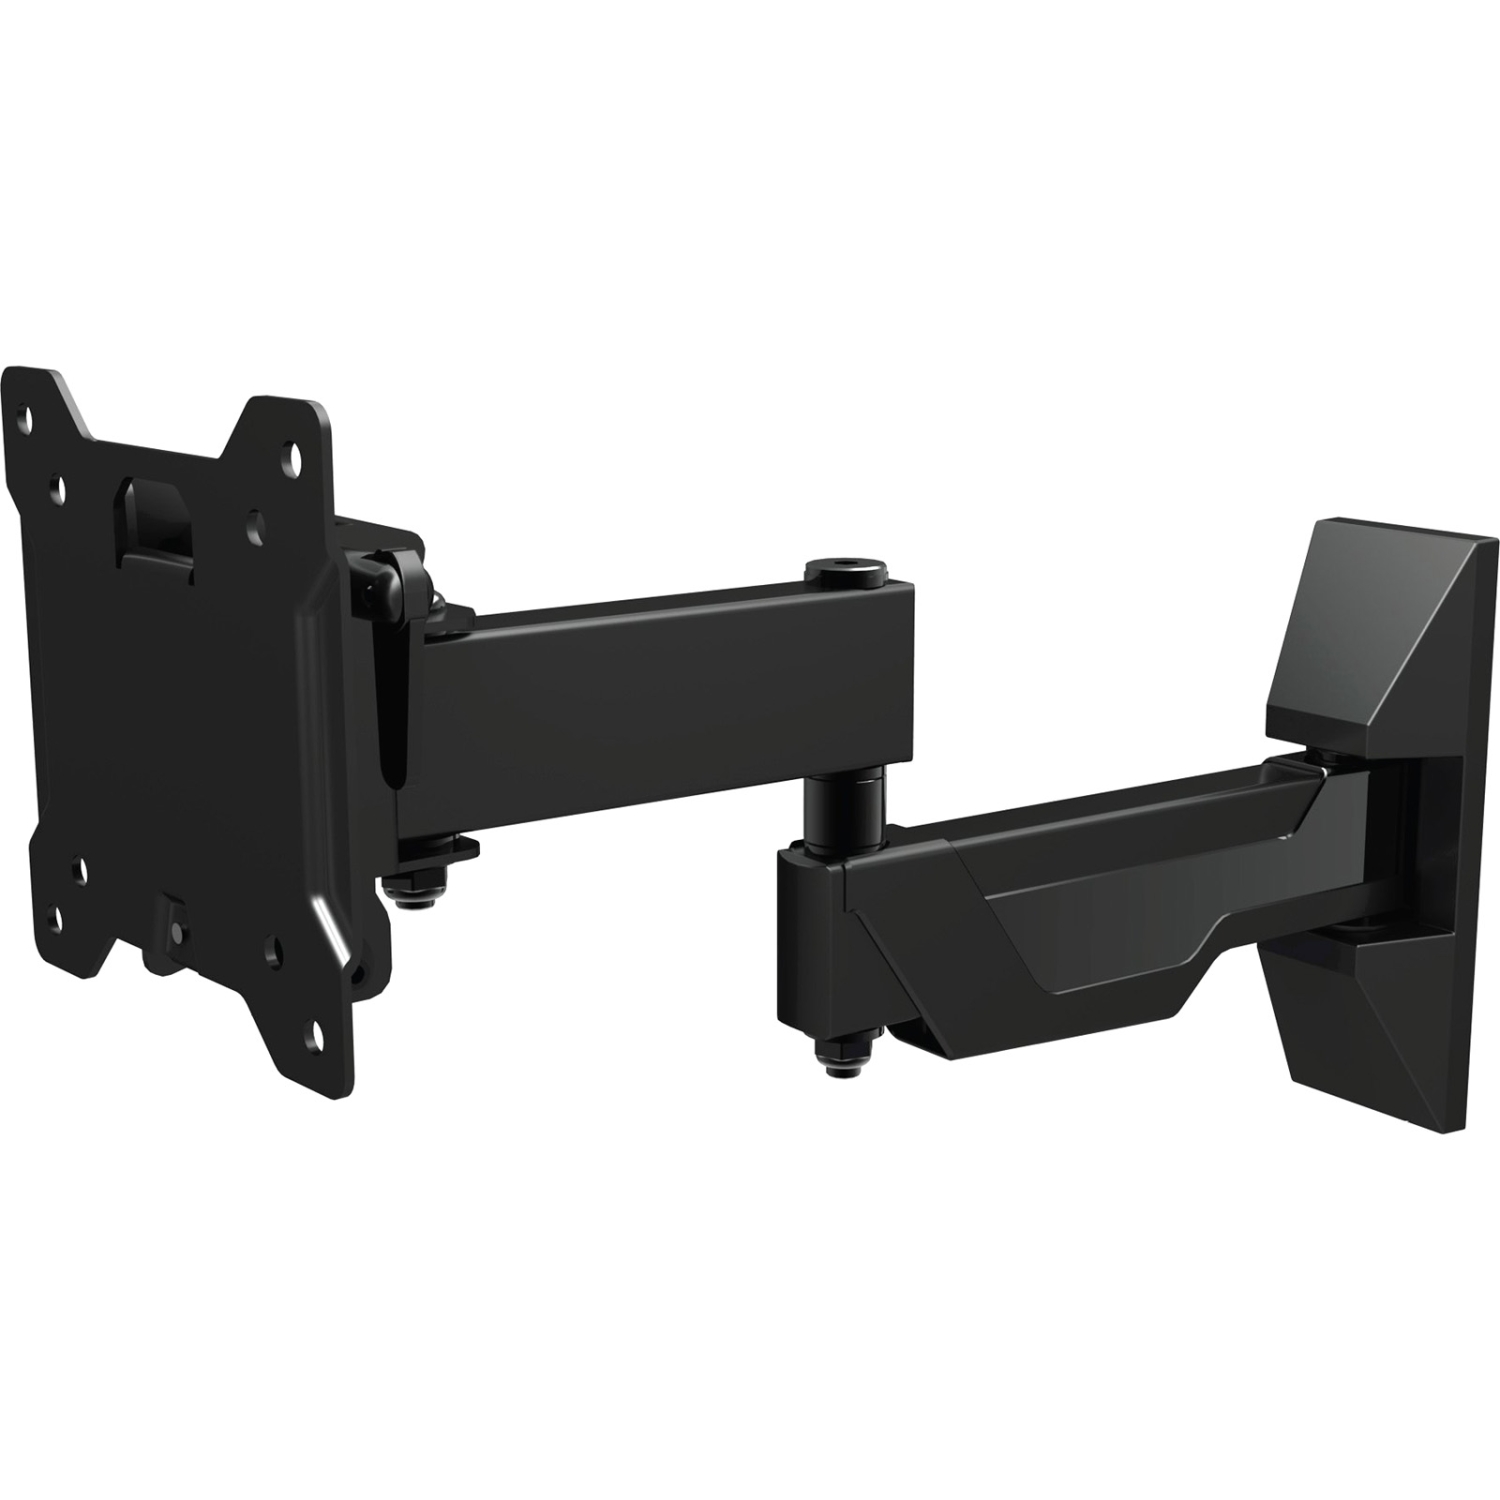 OmniMount OC40FMX - Mounting kit (wall plate, monitor plate, VESA adapter, mounting arm, mounting hardware, wall plate cover) - for flat panel - black powder coat - screen size: 13"-37" - image 2 of 2